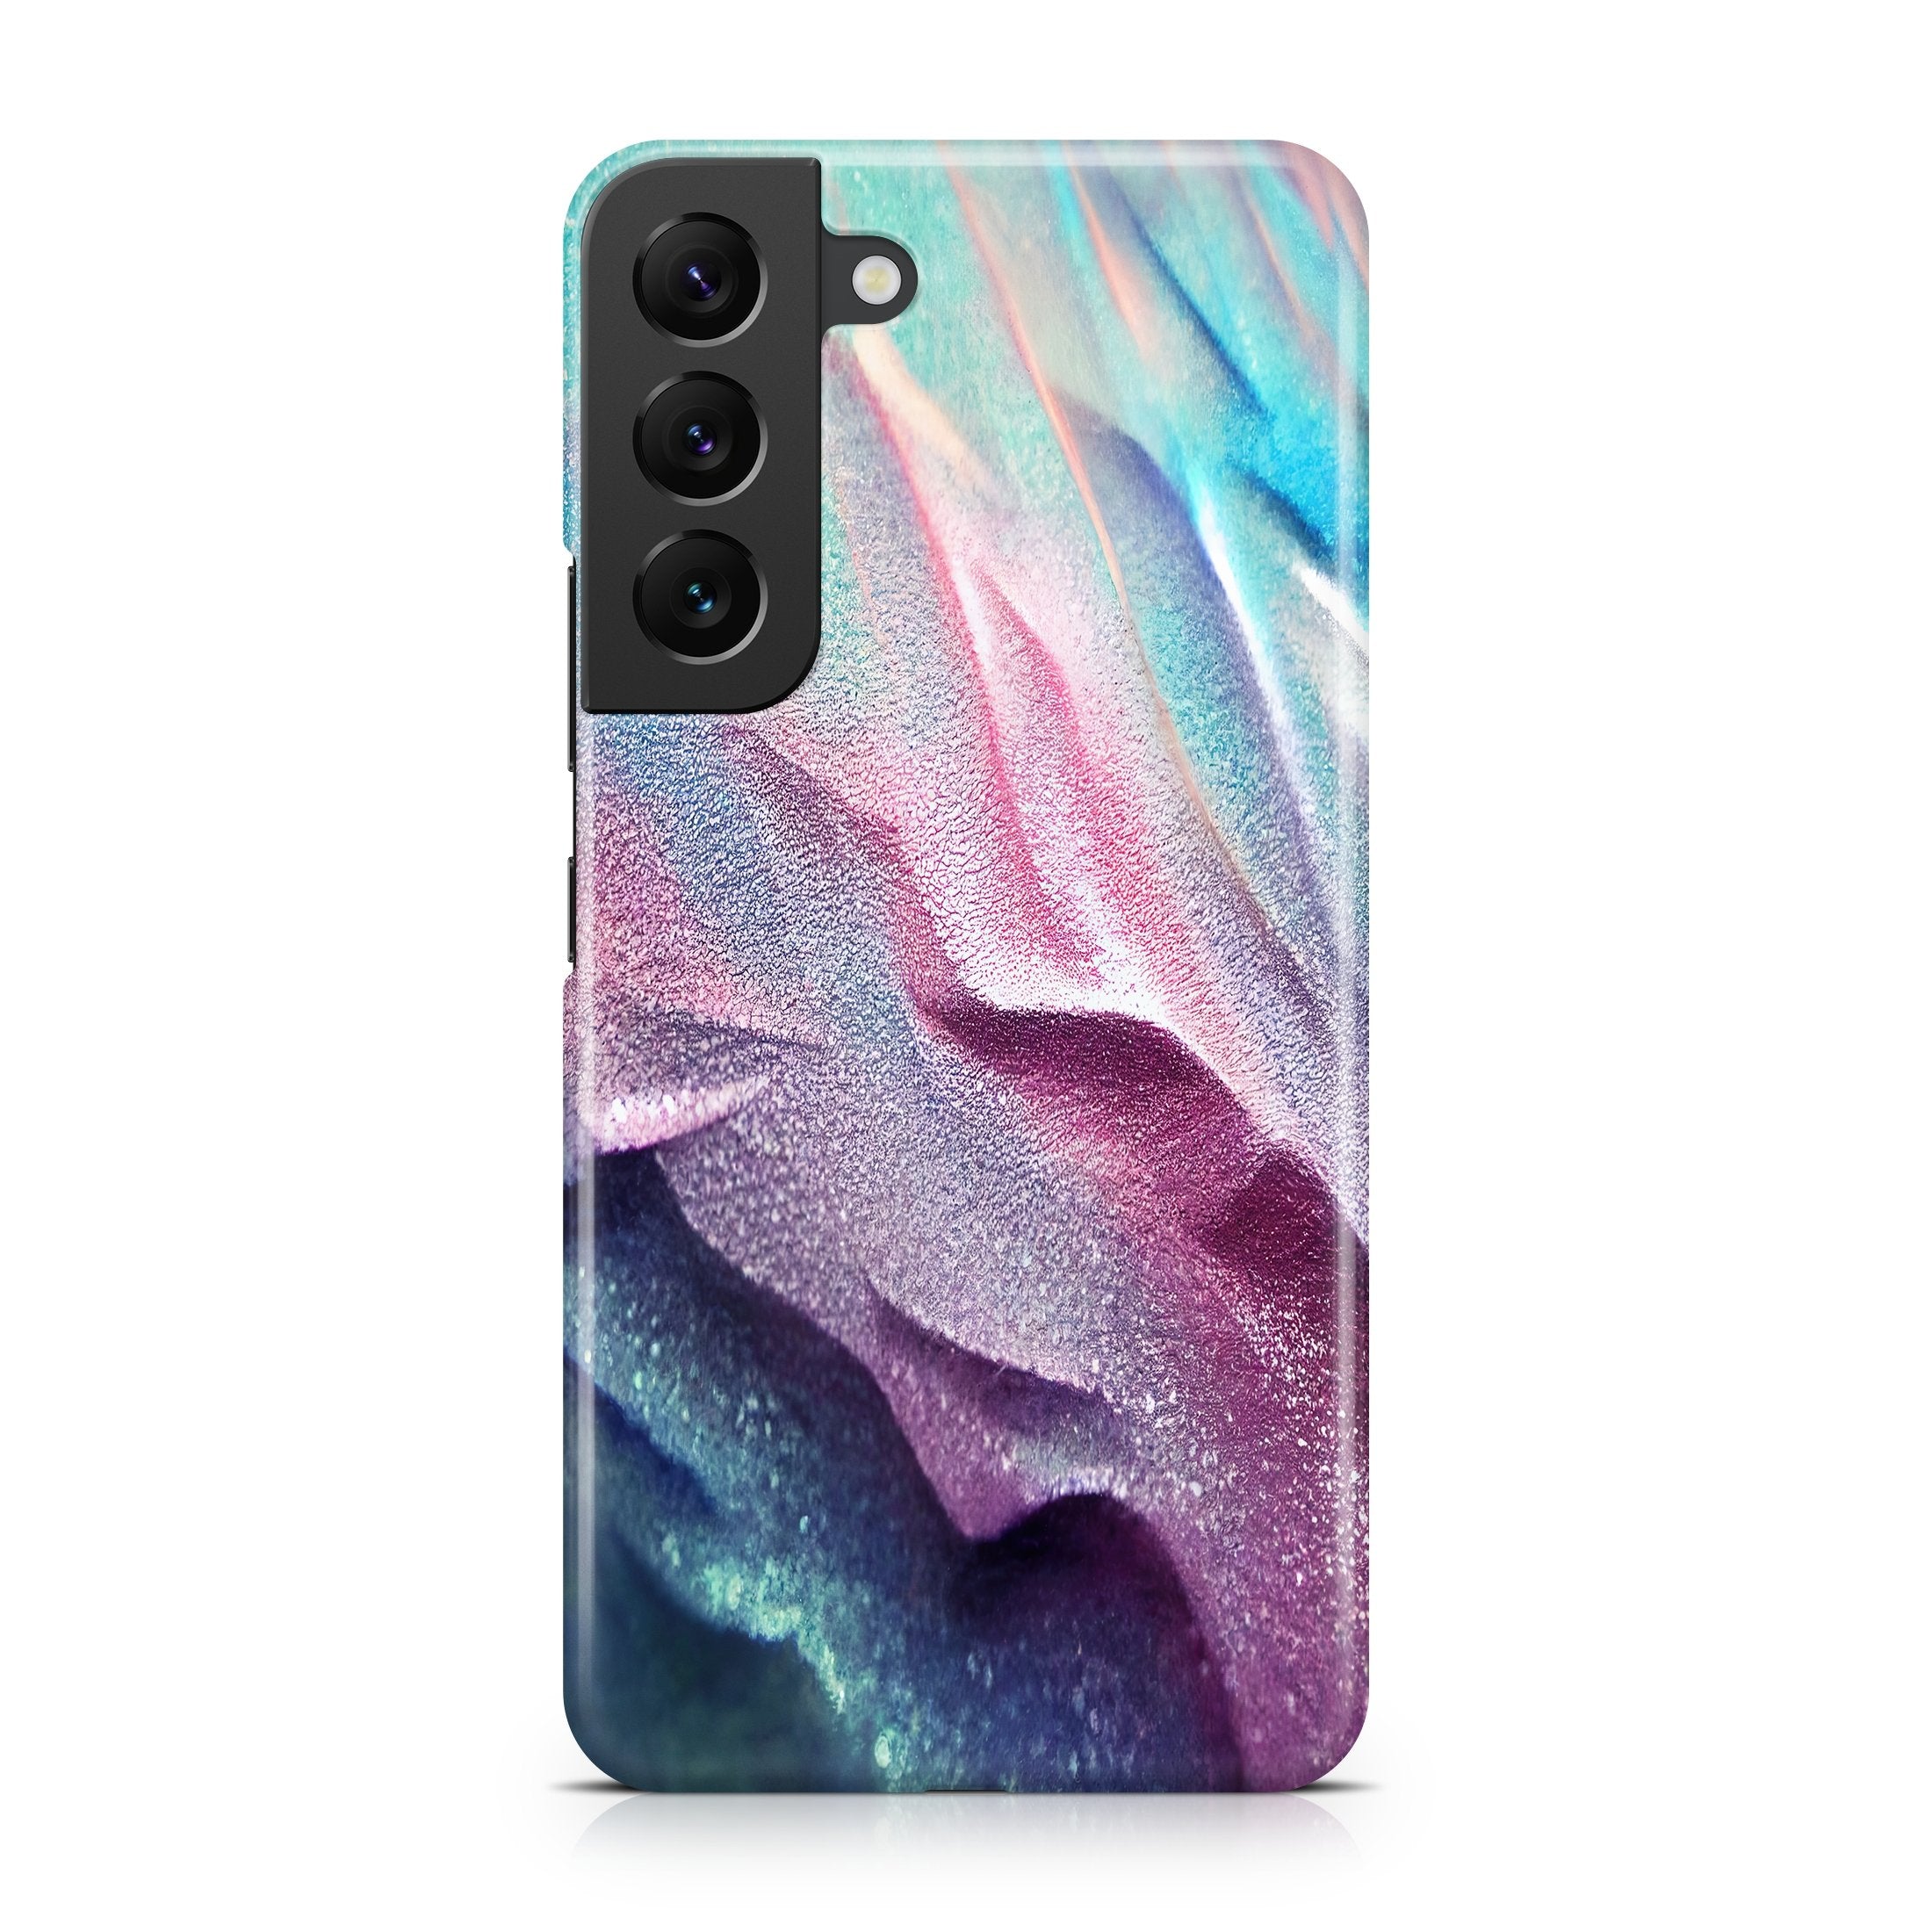 Butterfly Sands - Samsung phone case designs by CaseSwagger